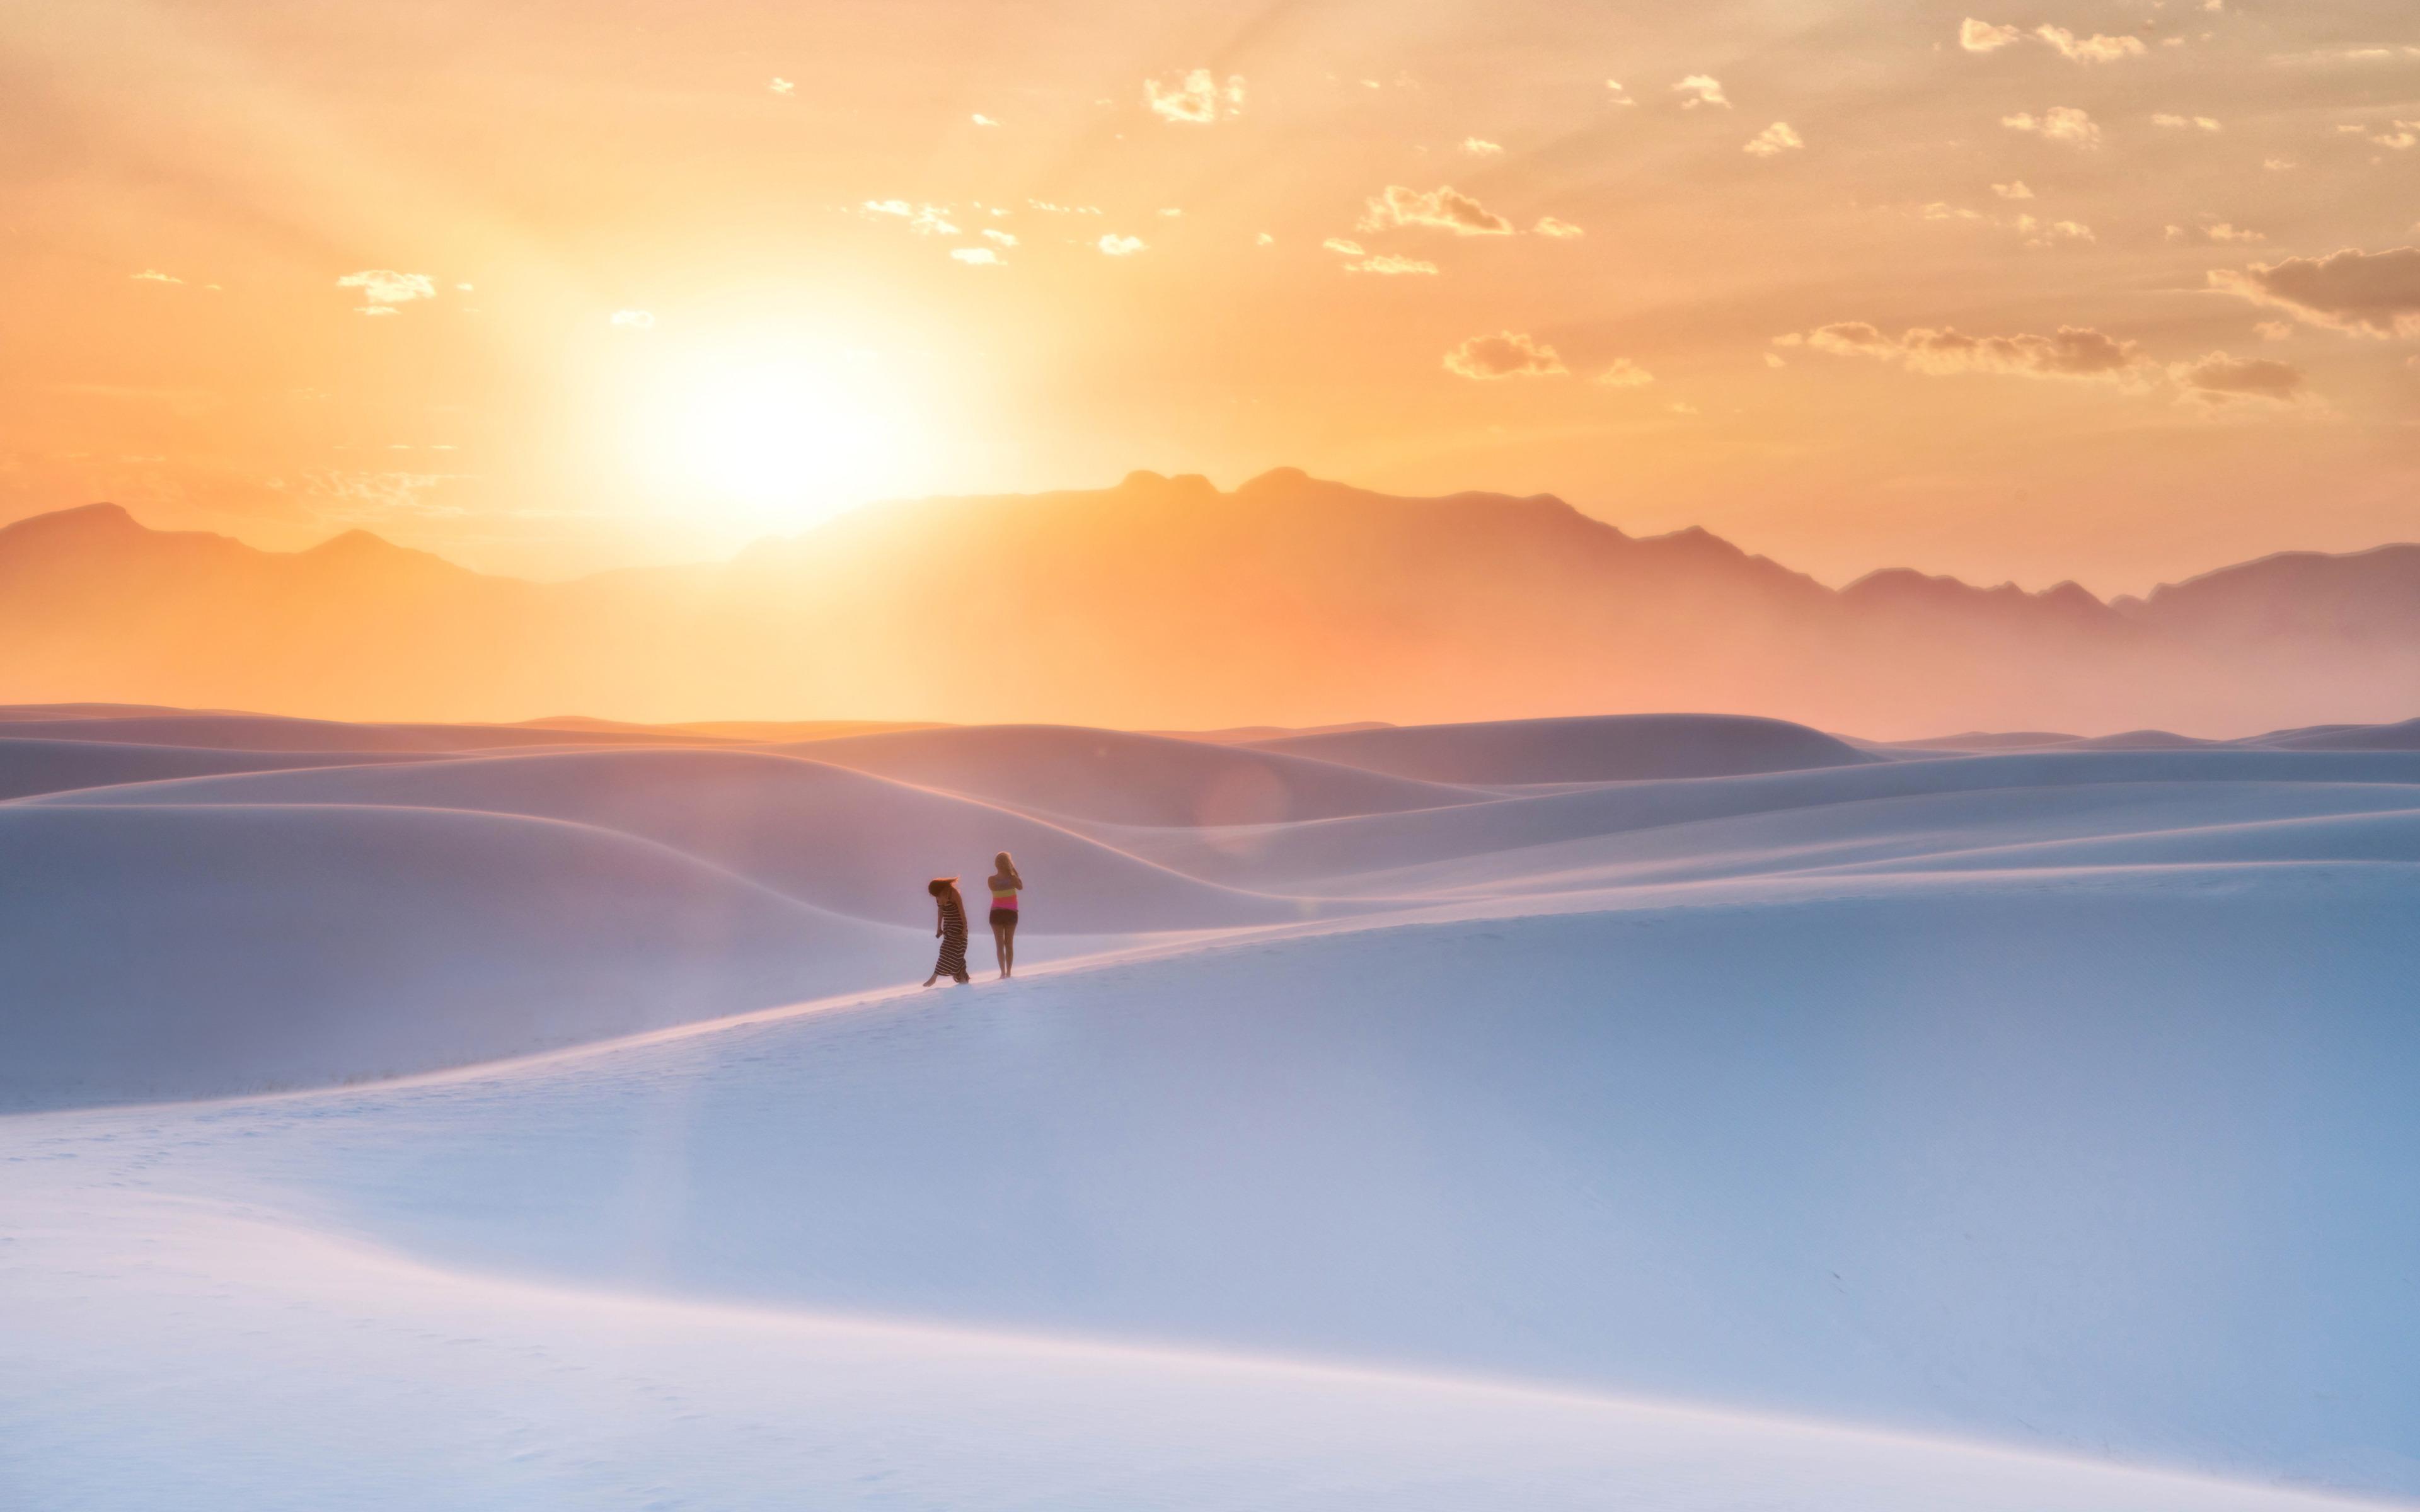 Magical View of White Sands at Sunset, New Mexico widescreen